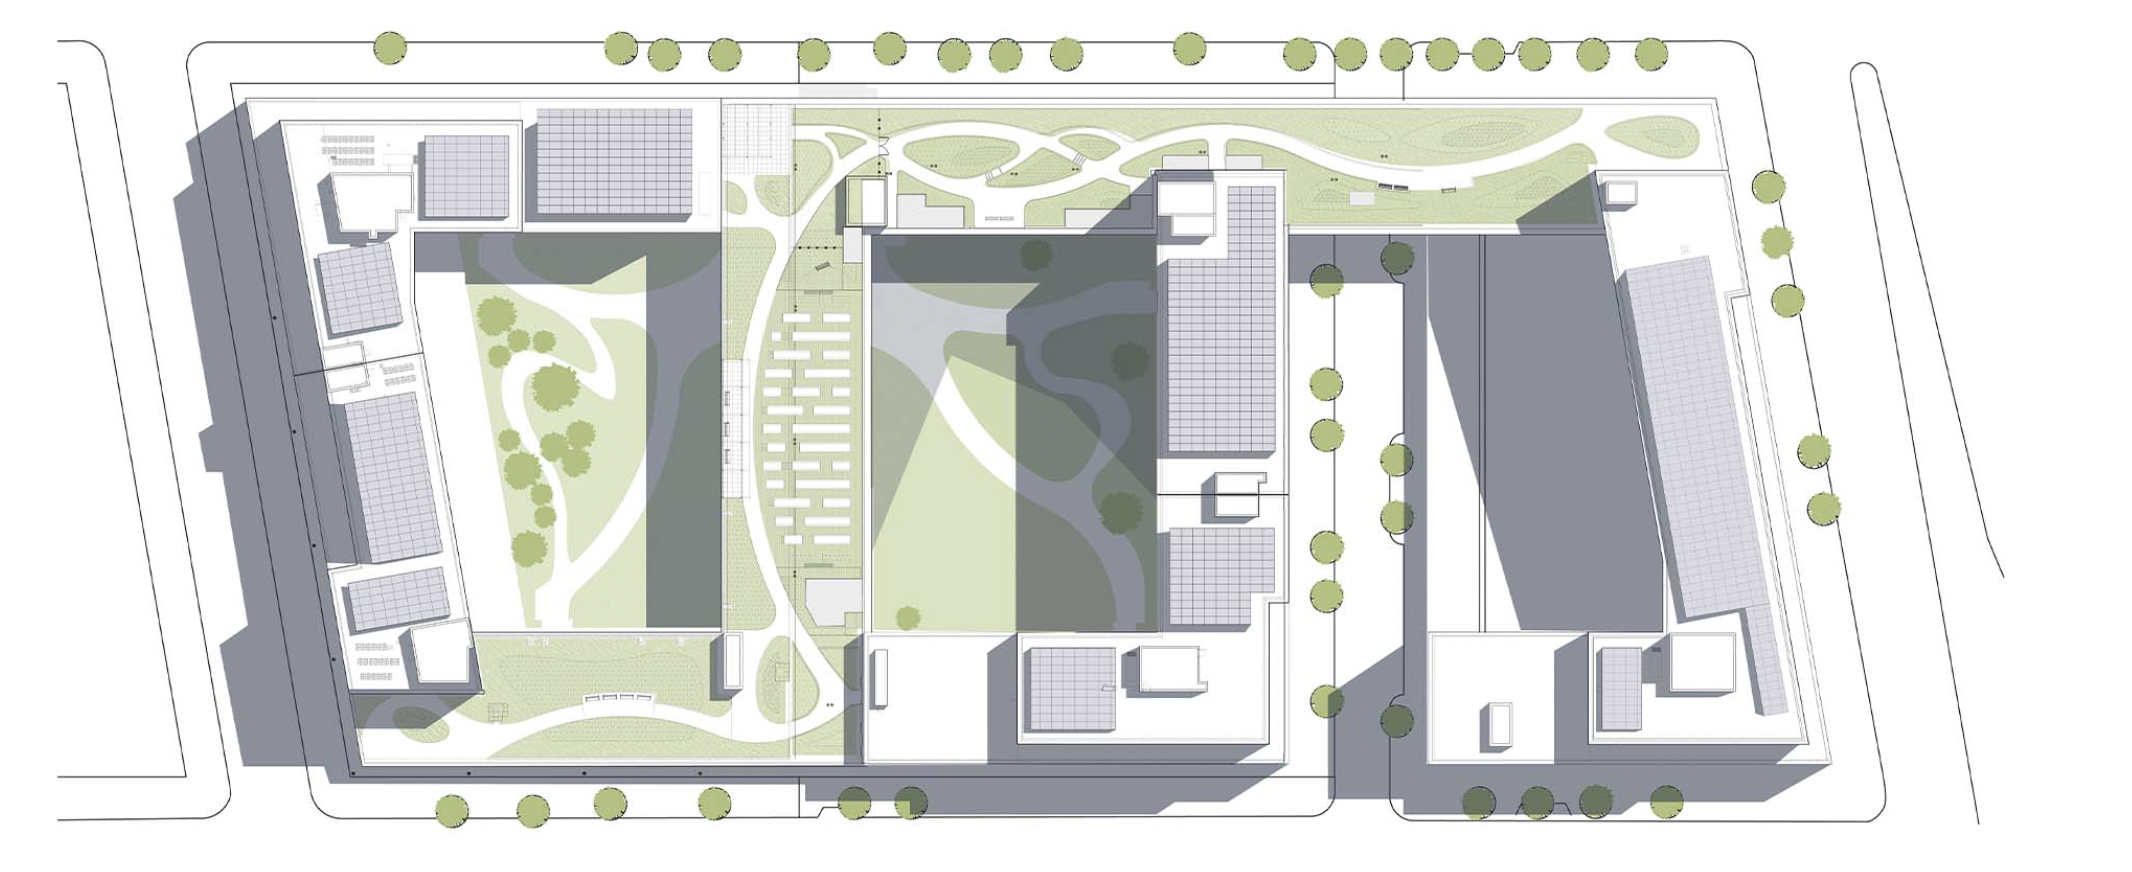 plan view showing the green space